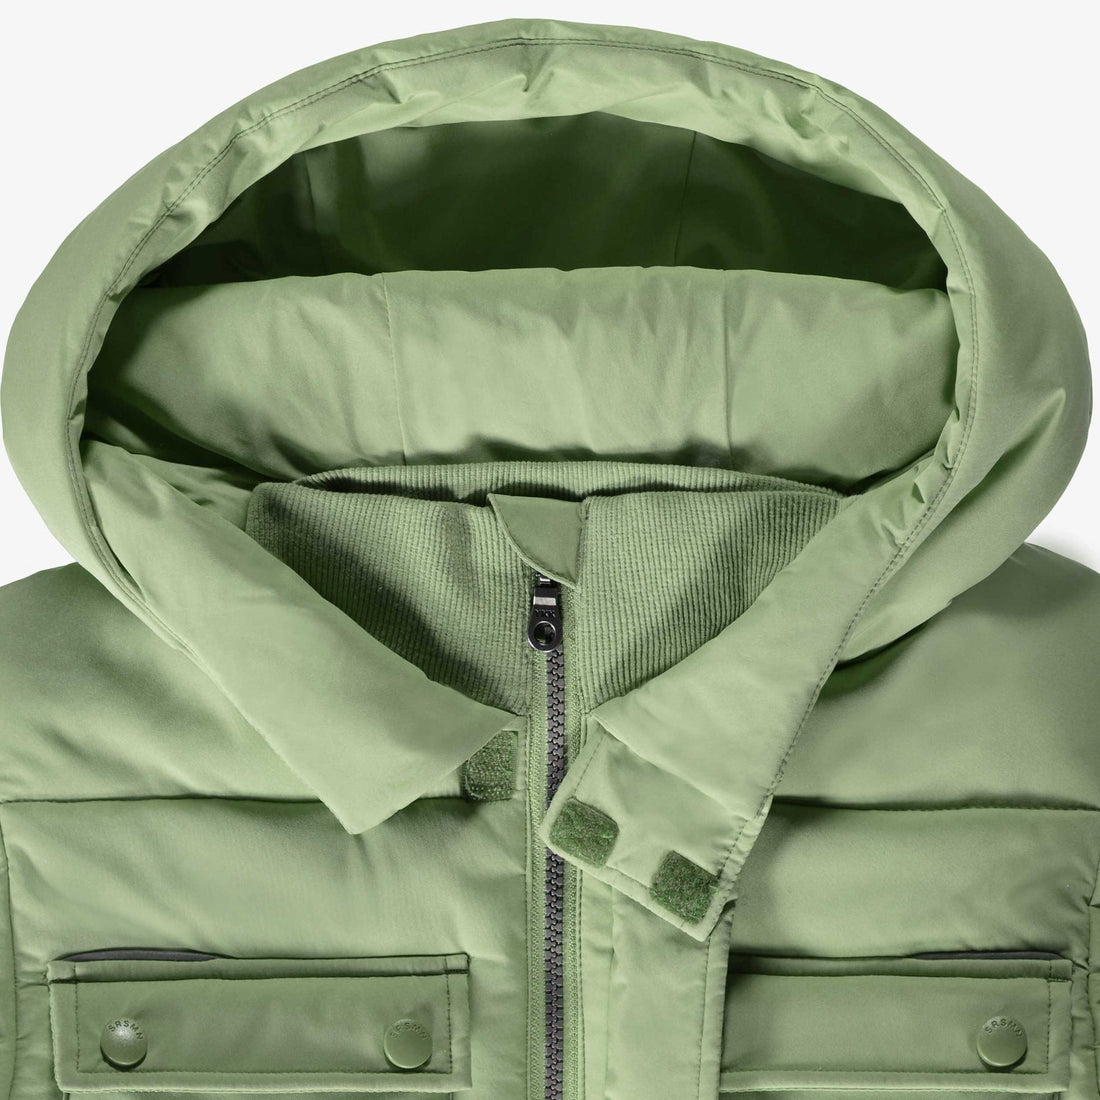 GREEN PUFFER COAT WITH HIGH COLLAR AND HOOD, CHILD